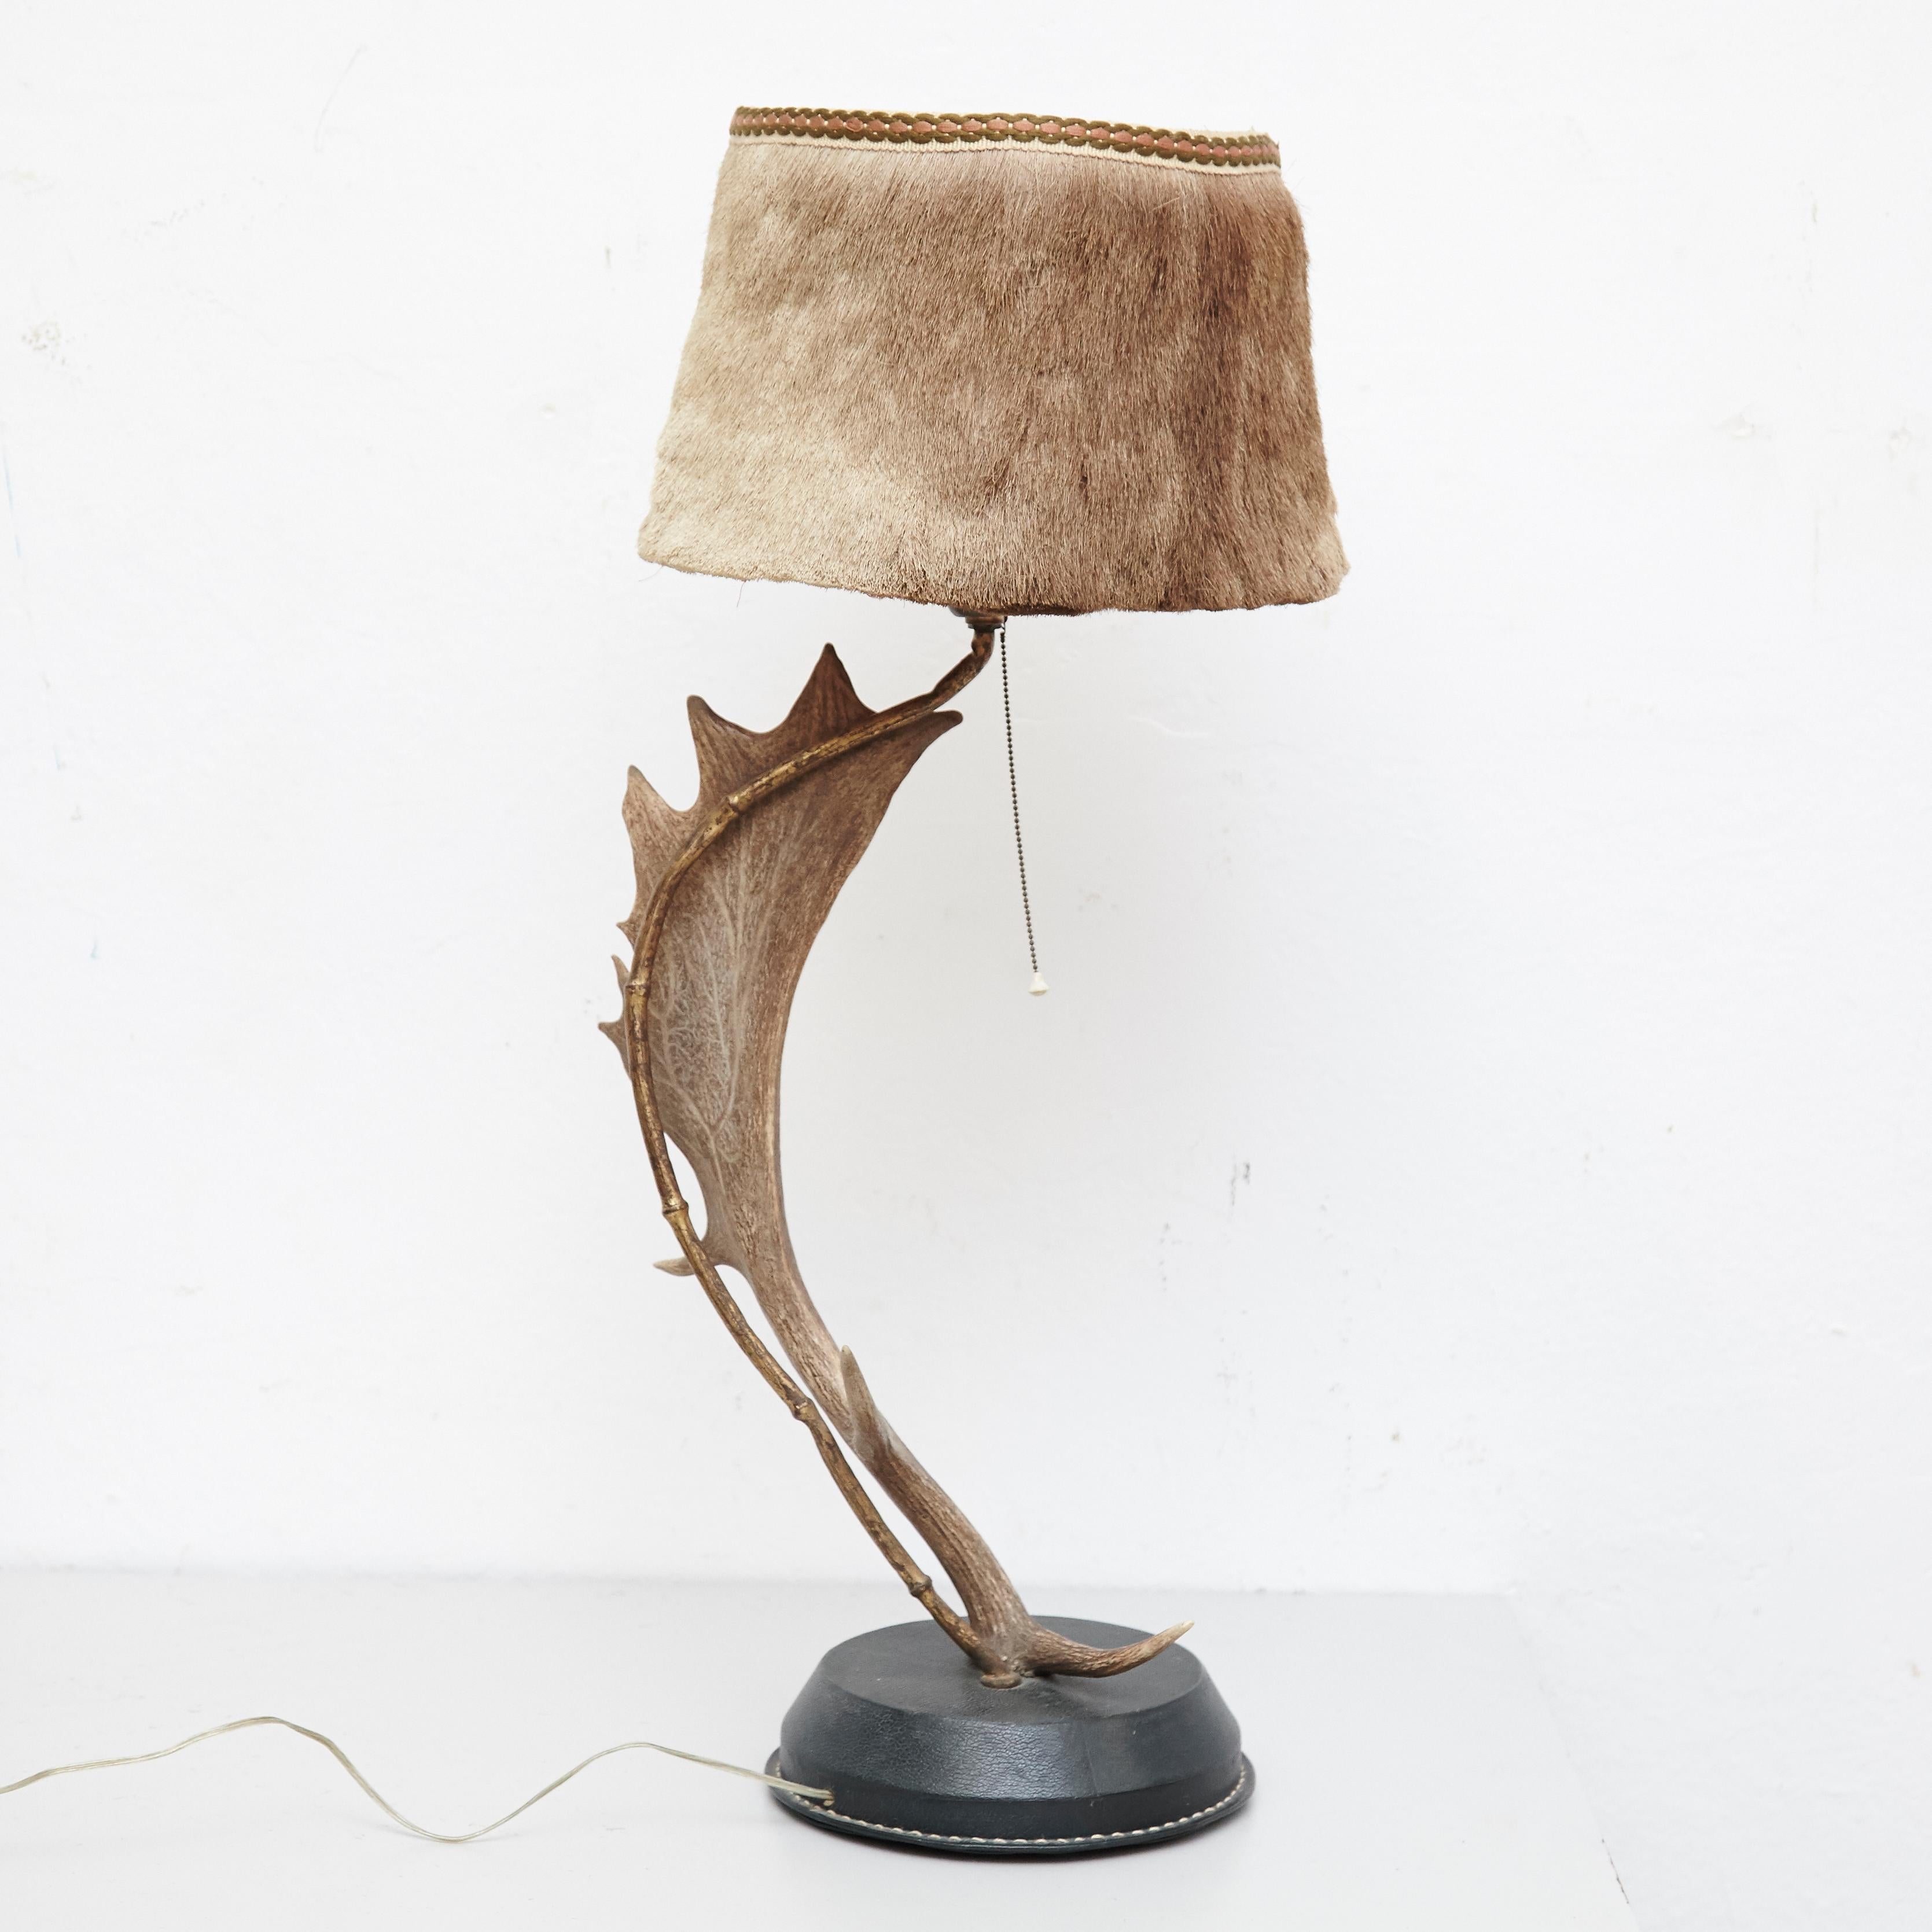 Natural antler deer horn table lamp

Measures: H 76 x W 30 x D 30

In good original condition, with minor wear consistent with age and use, preserving a beautiful patina.

  